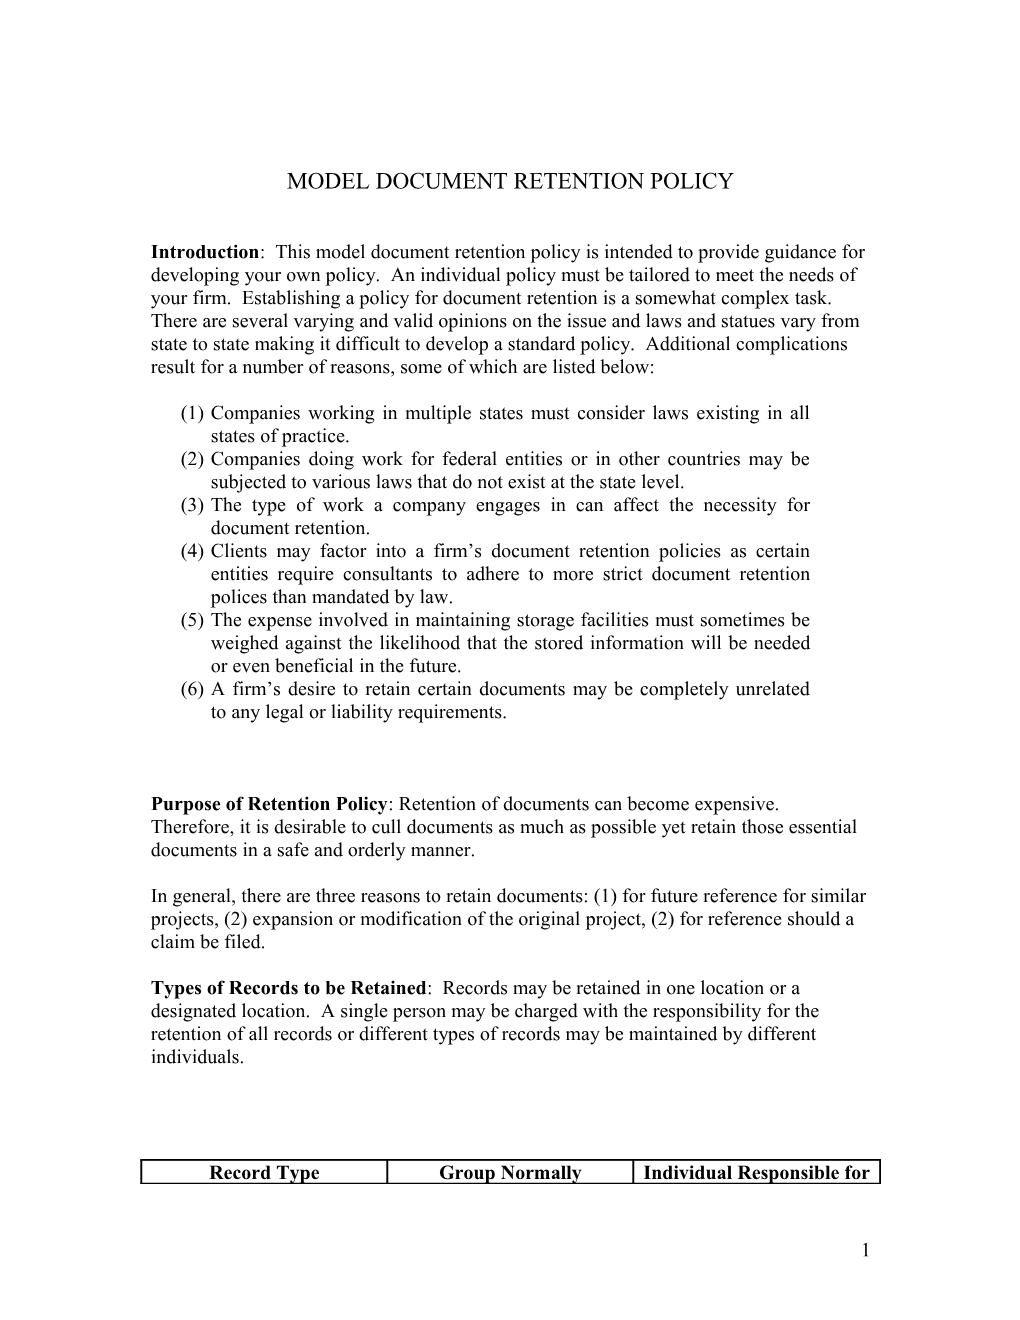 Model Document Retention Policy